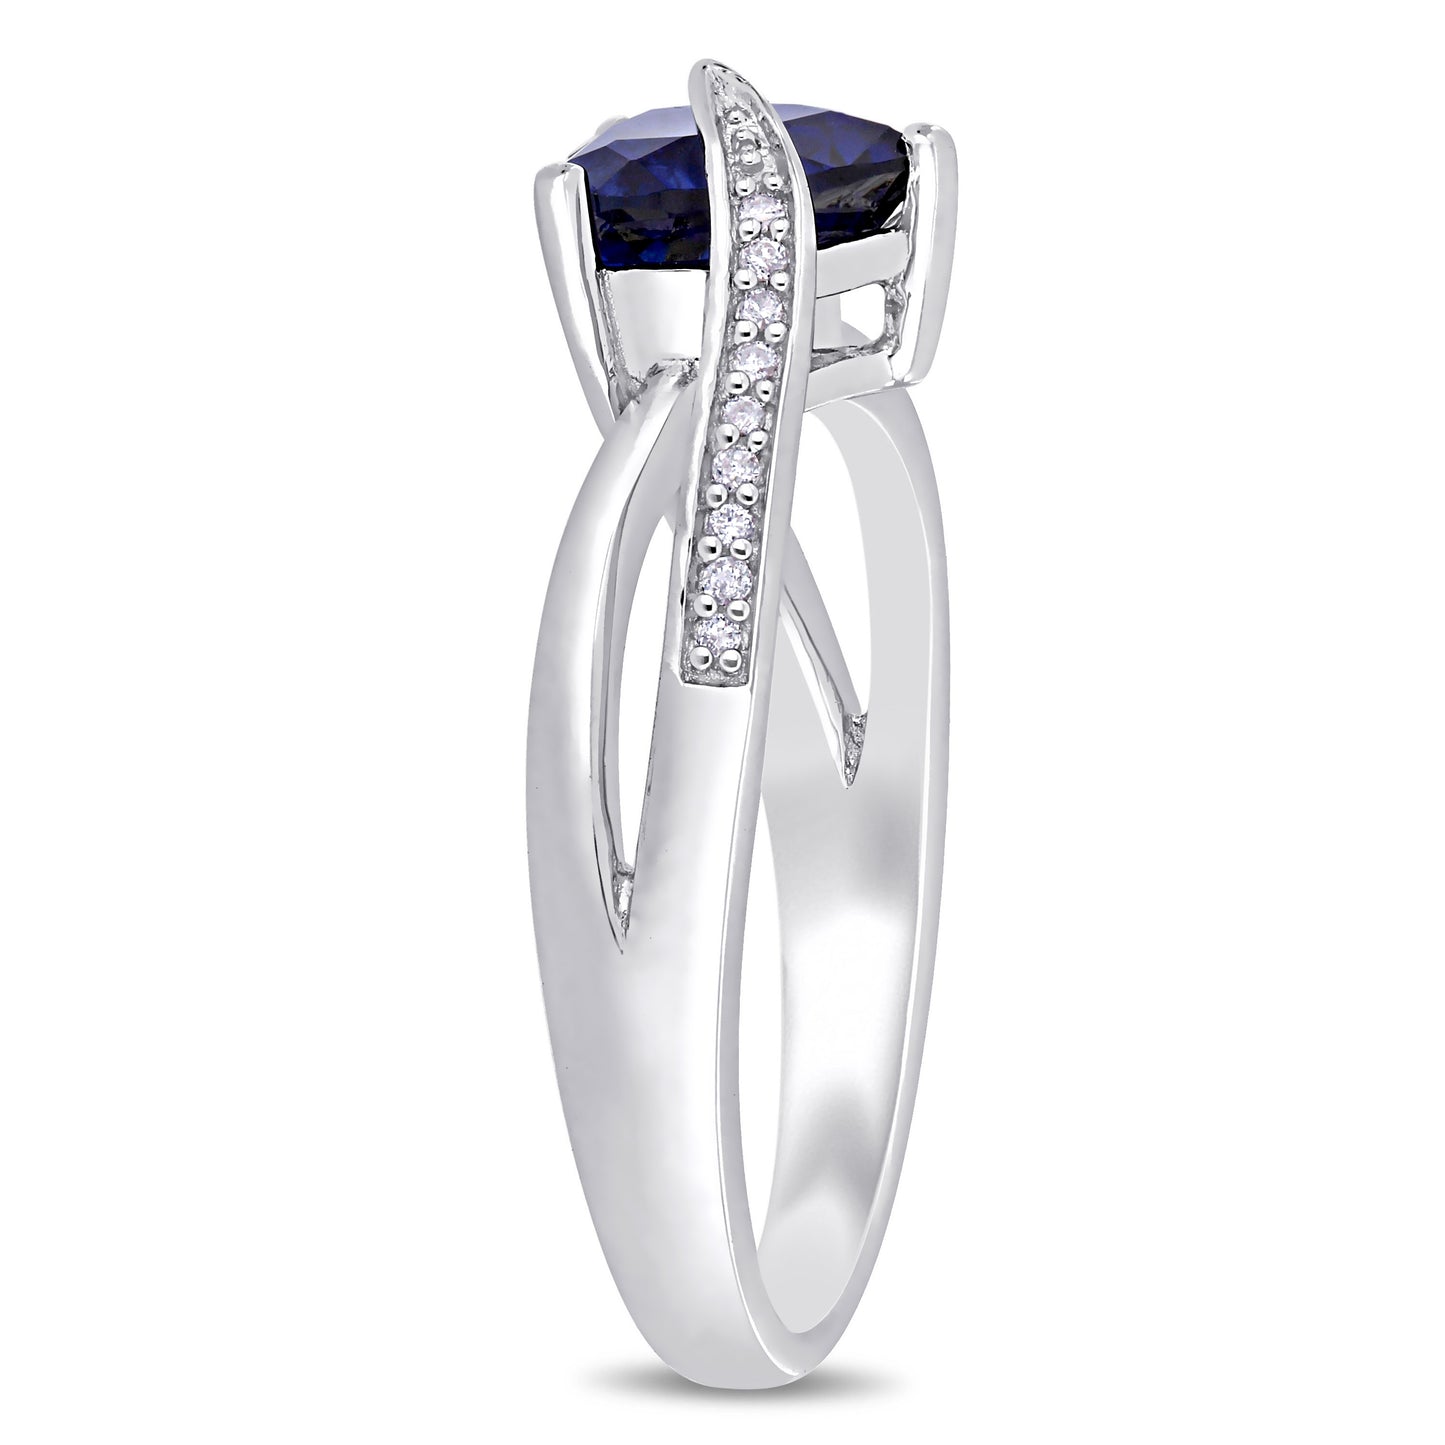 Heart Infinity Sapphire & Diamond Ring in Sterling Silver